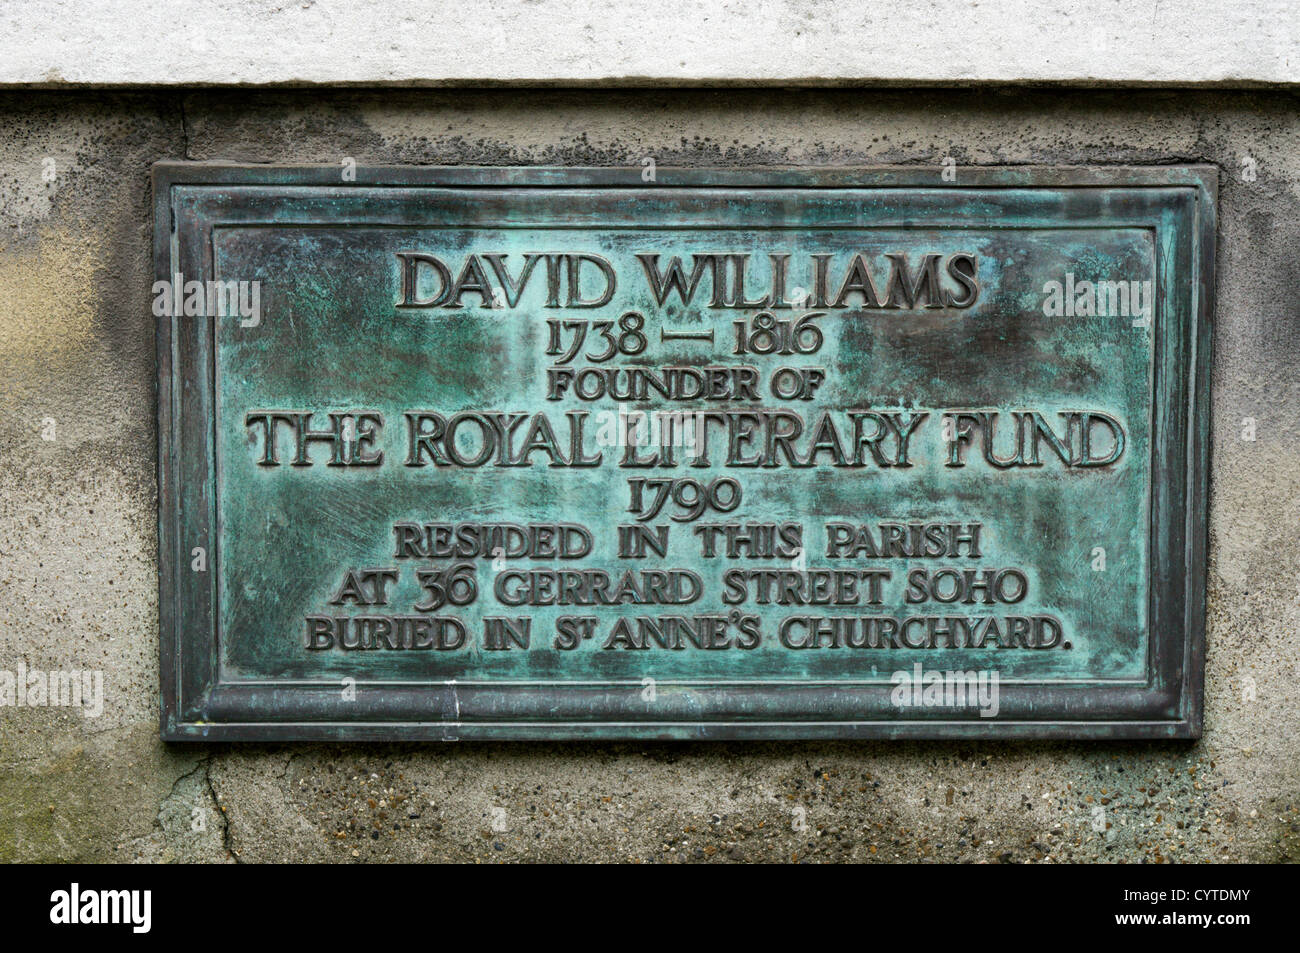 Plaque commemorating Rev David Williams, the founder of the Royal Literary Fund, in the churchyard of St Anne's, Soho. Stock Photo